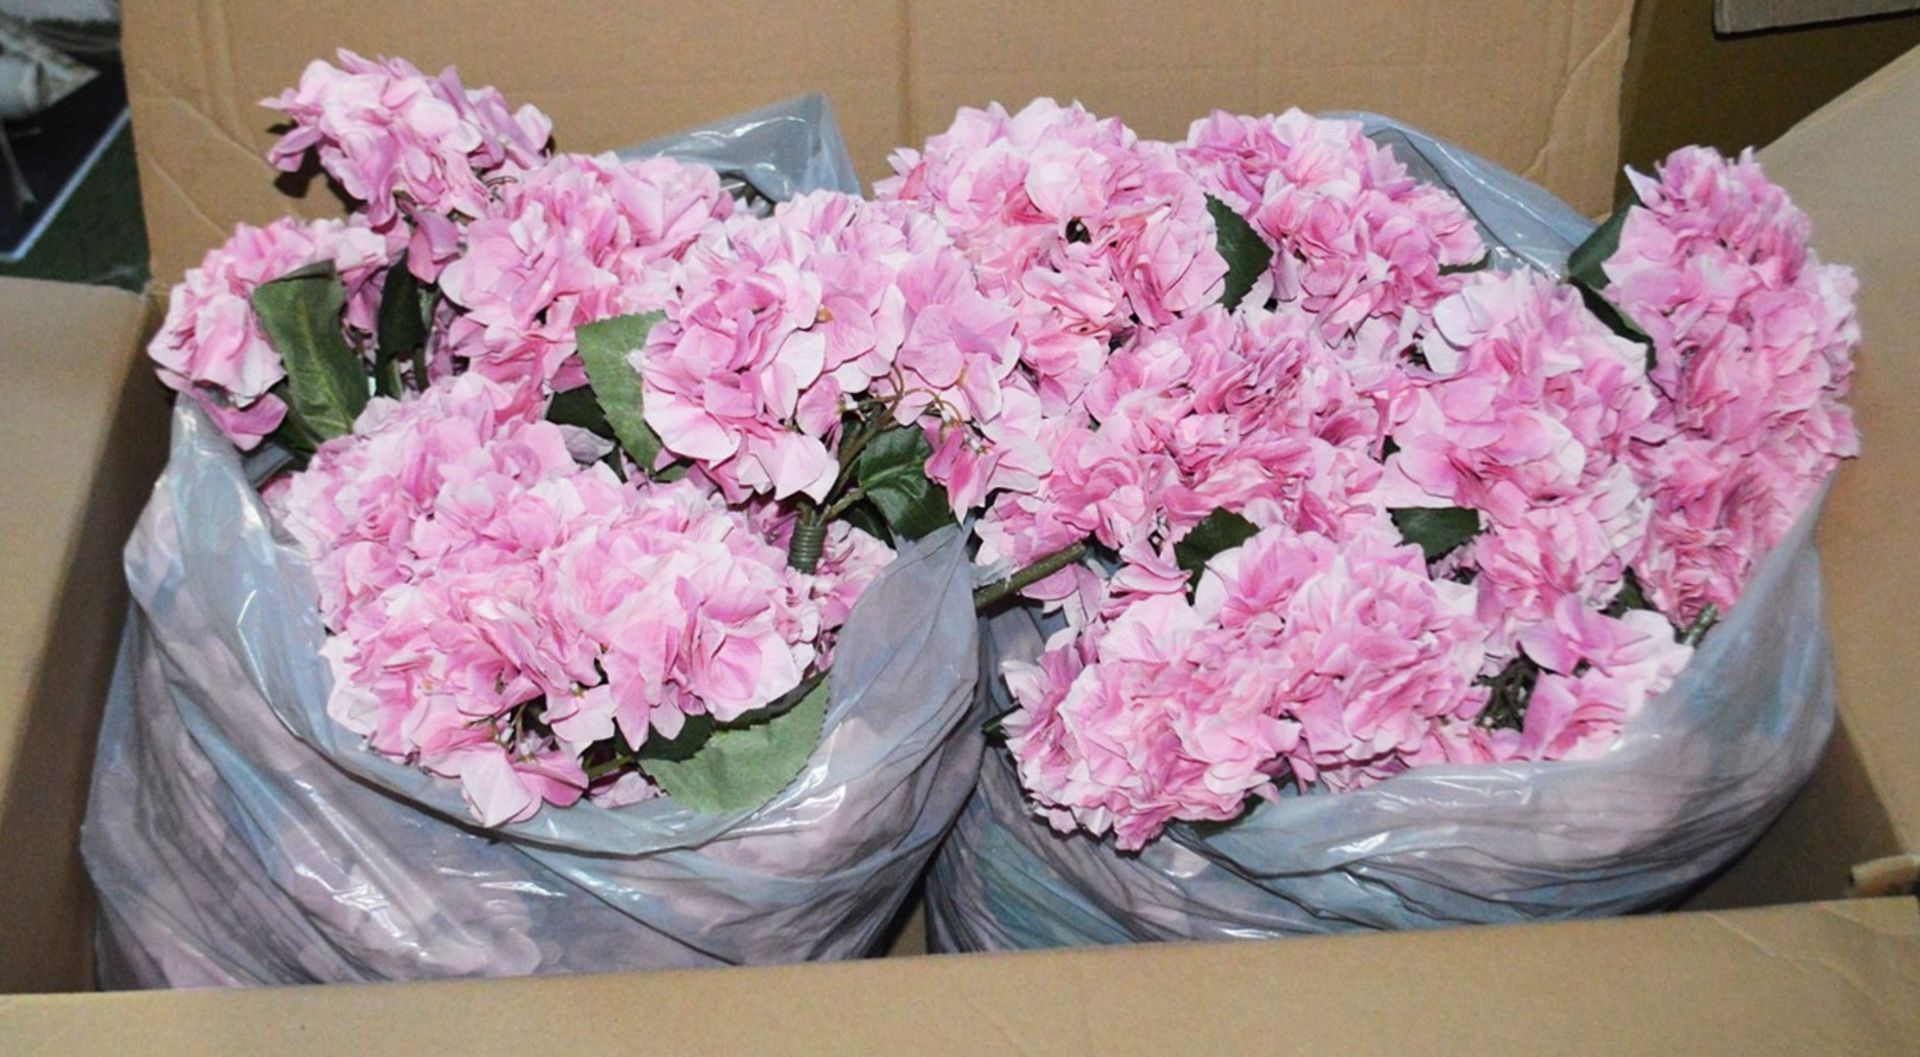 Large Quantity Of Premium Artificial Hydrangeas In Light Pink Silk - Approx. 160 pcs - Ex-Display - Image 2 of 4